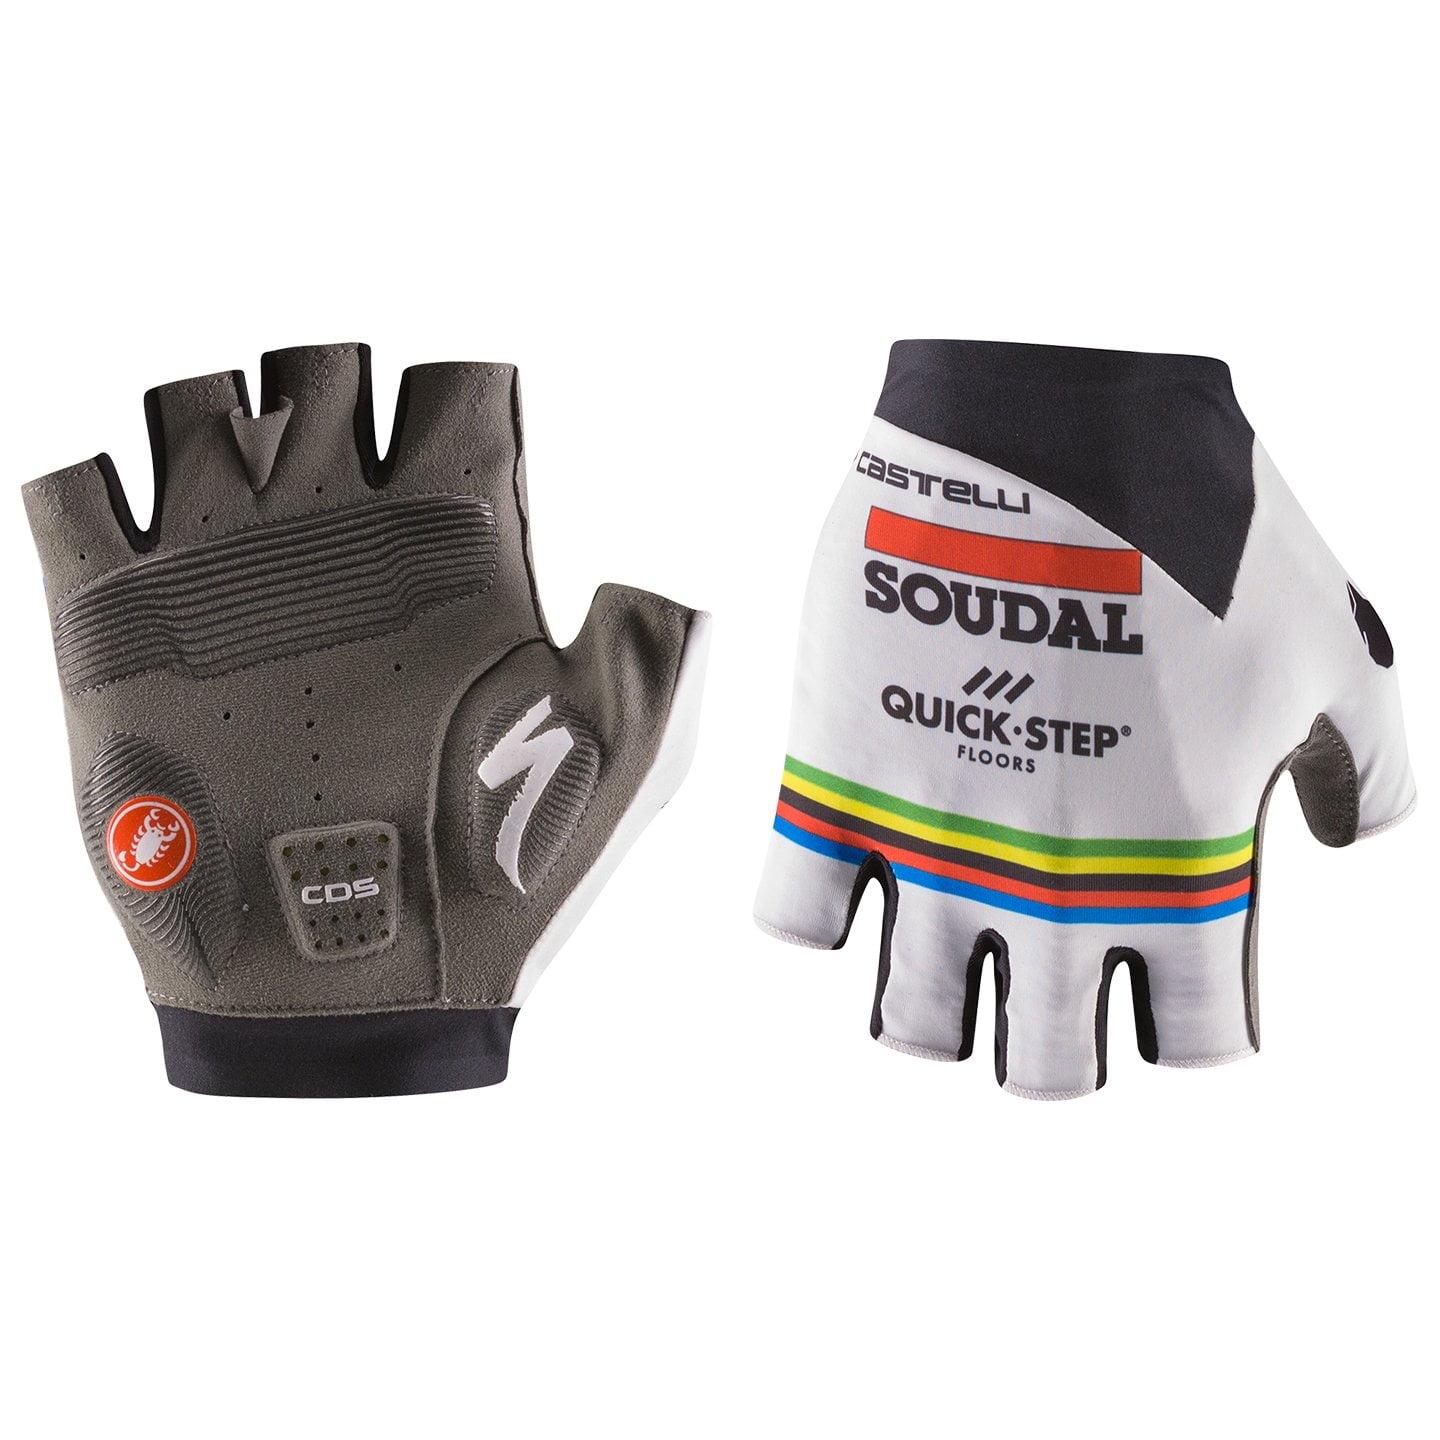 SOUDAL QUICK-STEP World Champion 2023 Cycling Gloves, for men, size 2XL, Cycling gloves, Cycle clothing